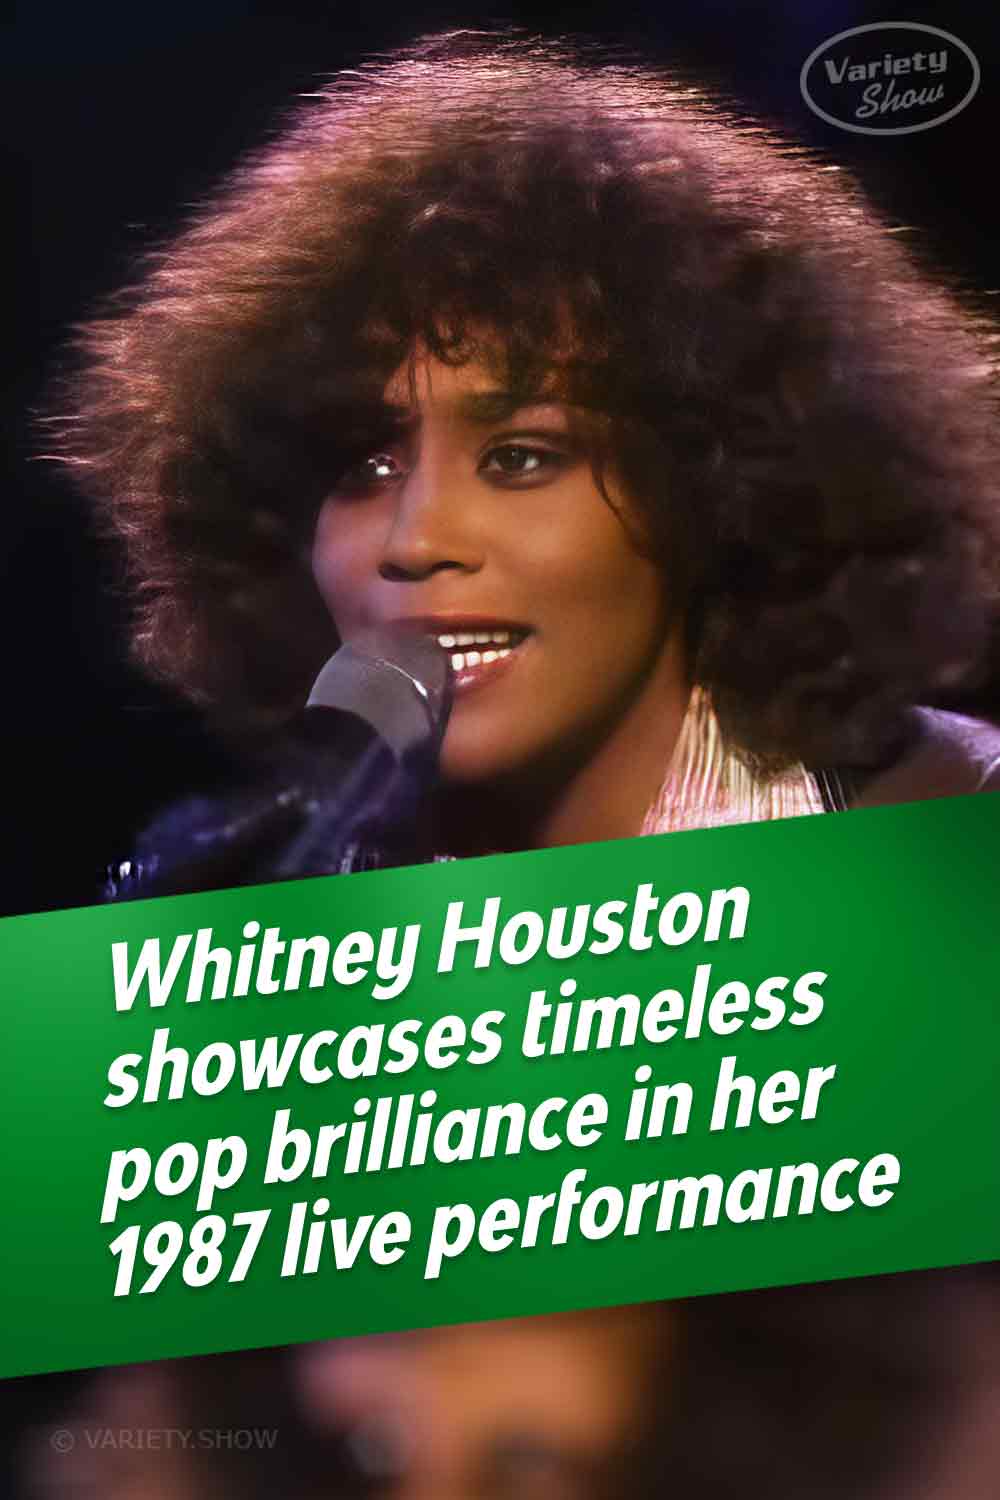 Whitney Houston showcases timeless pop brilliance in her 1987 live performance